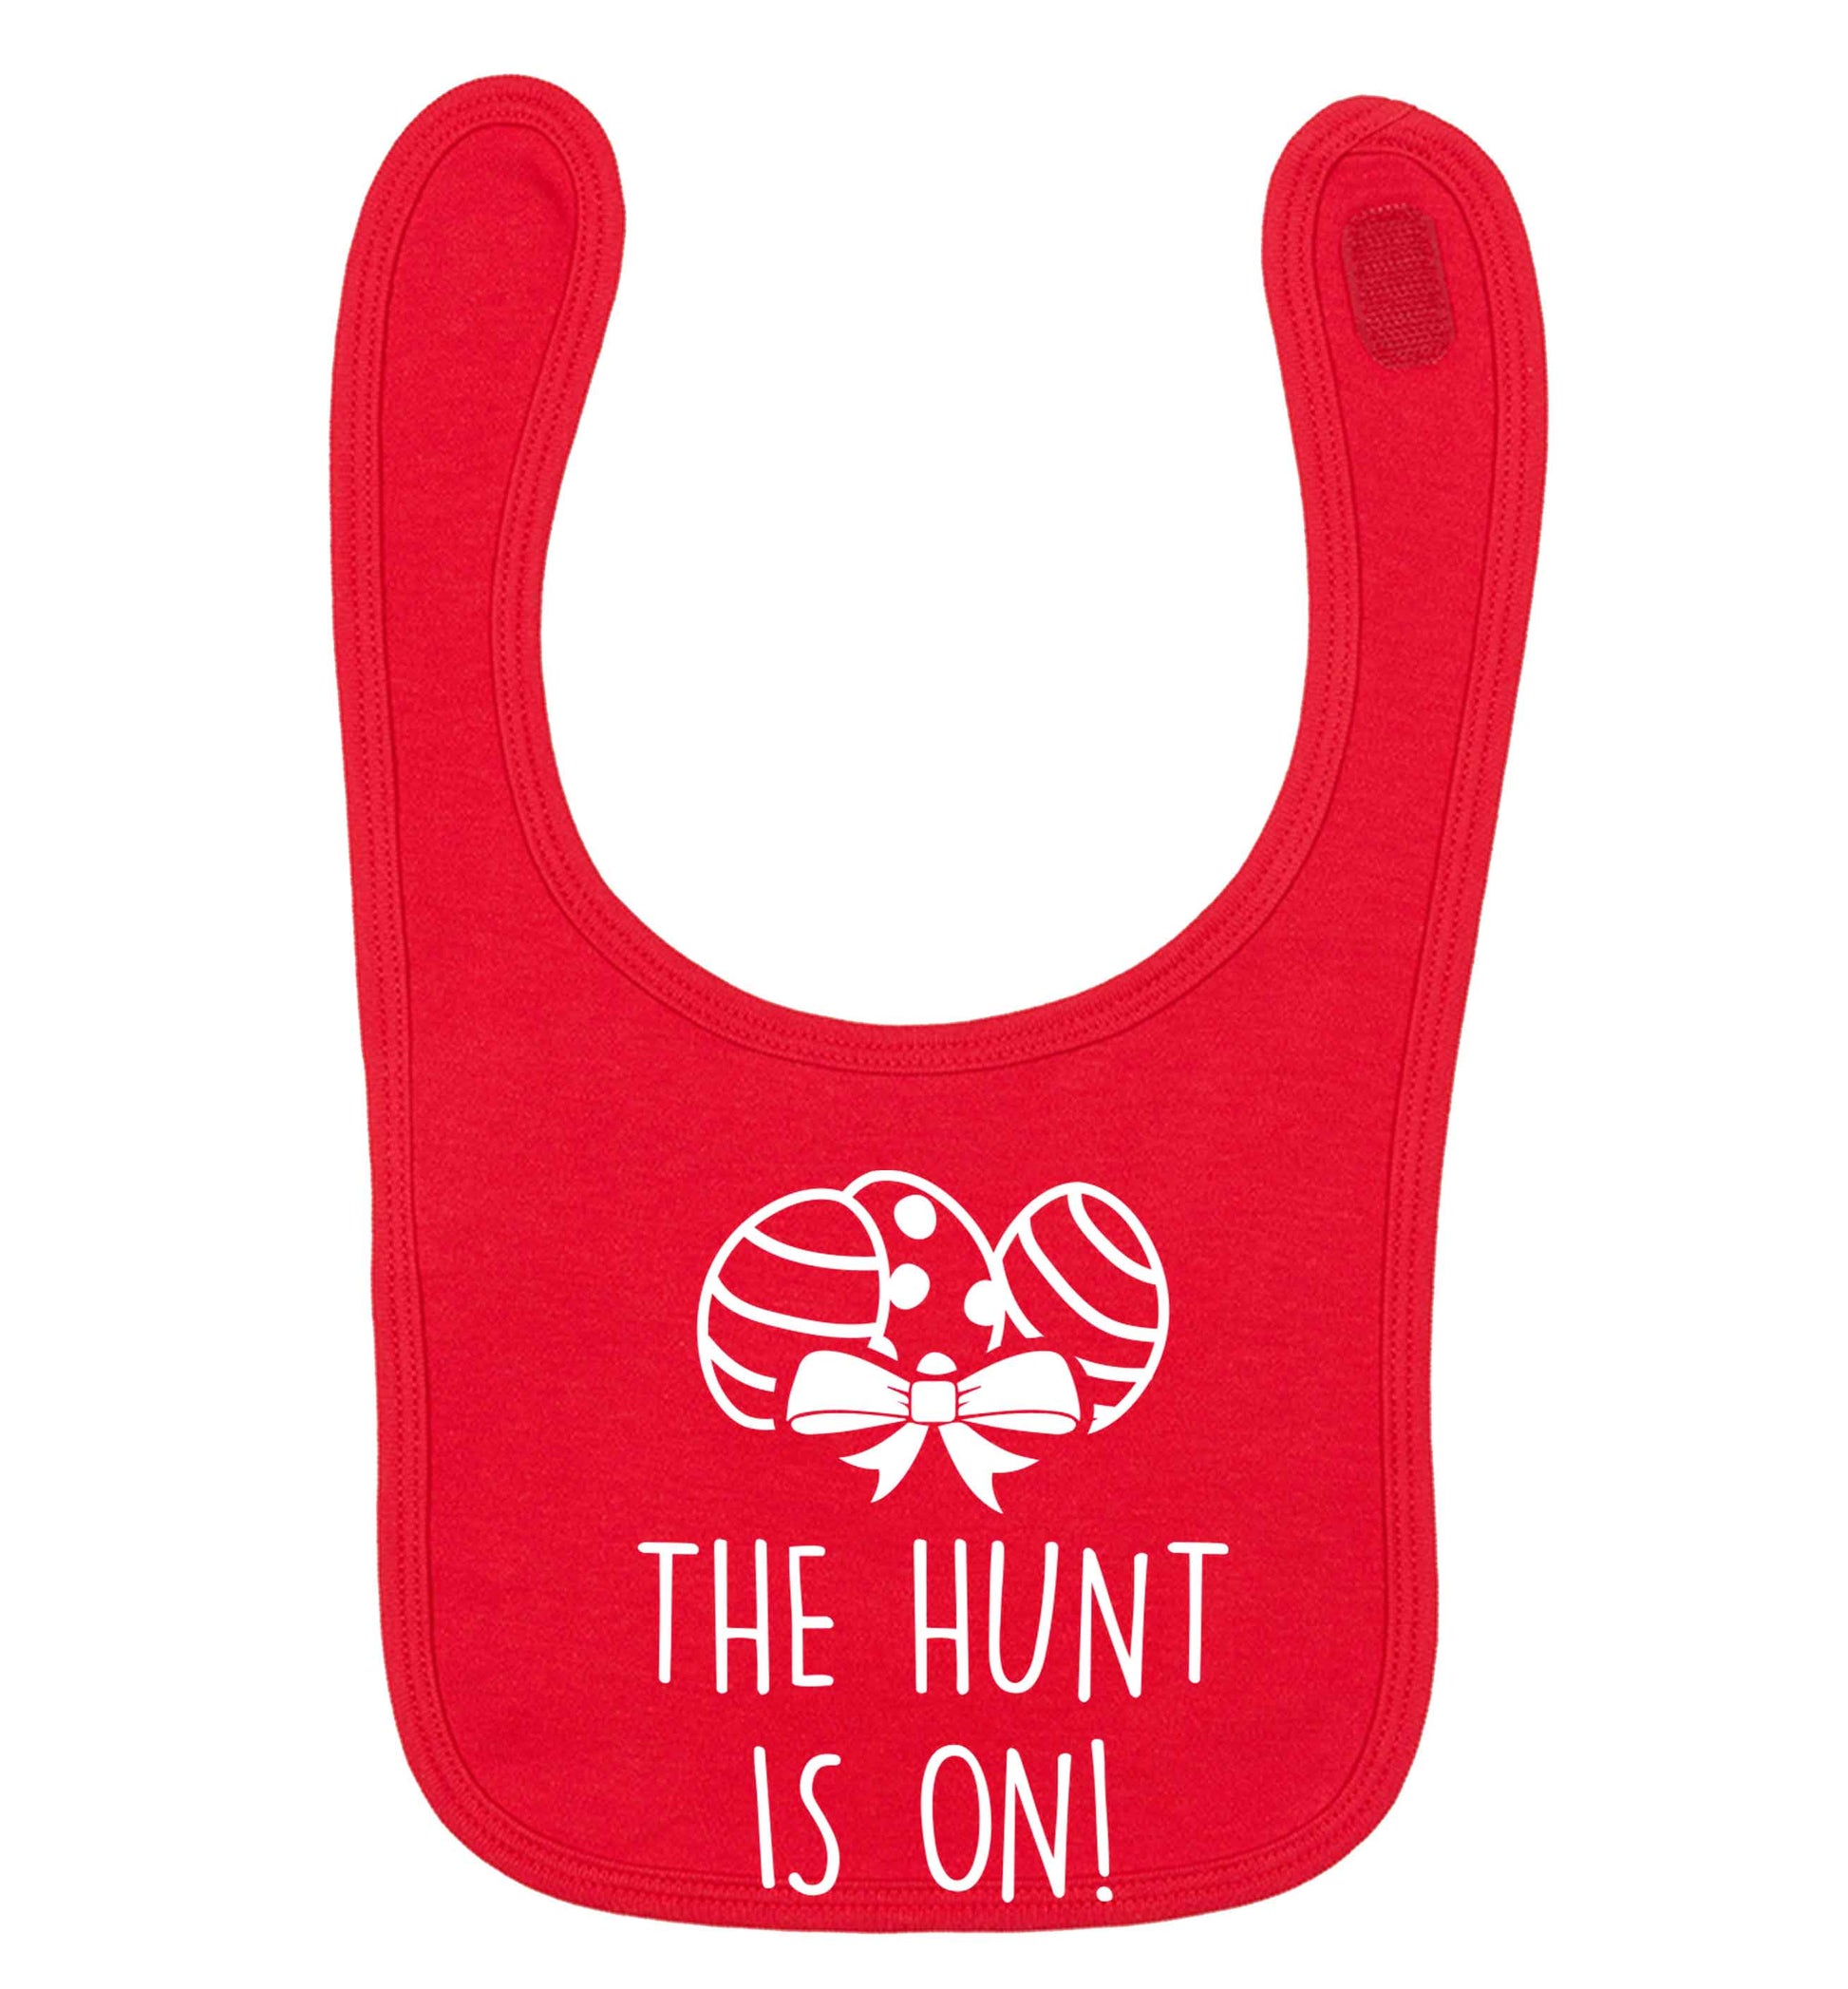 The hunt is on red baby bib